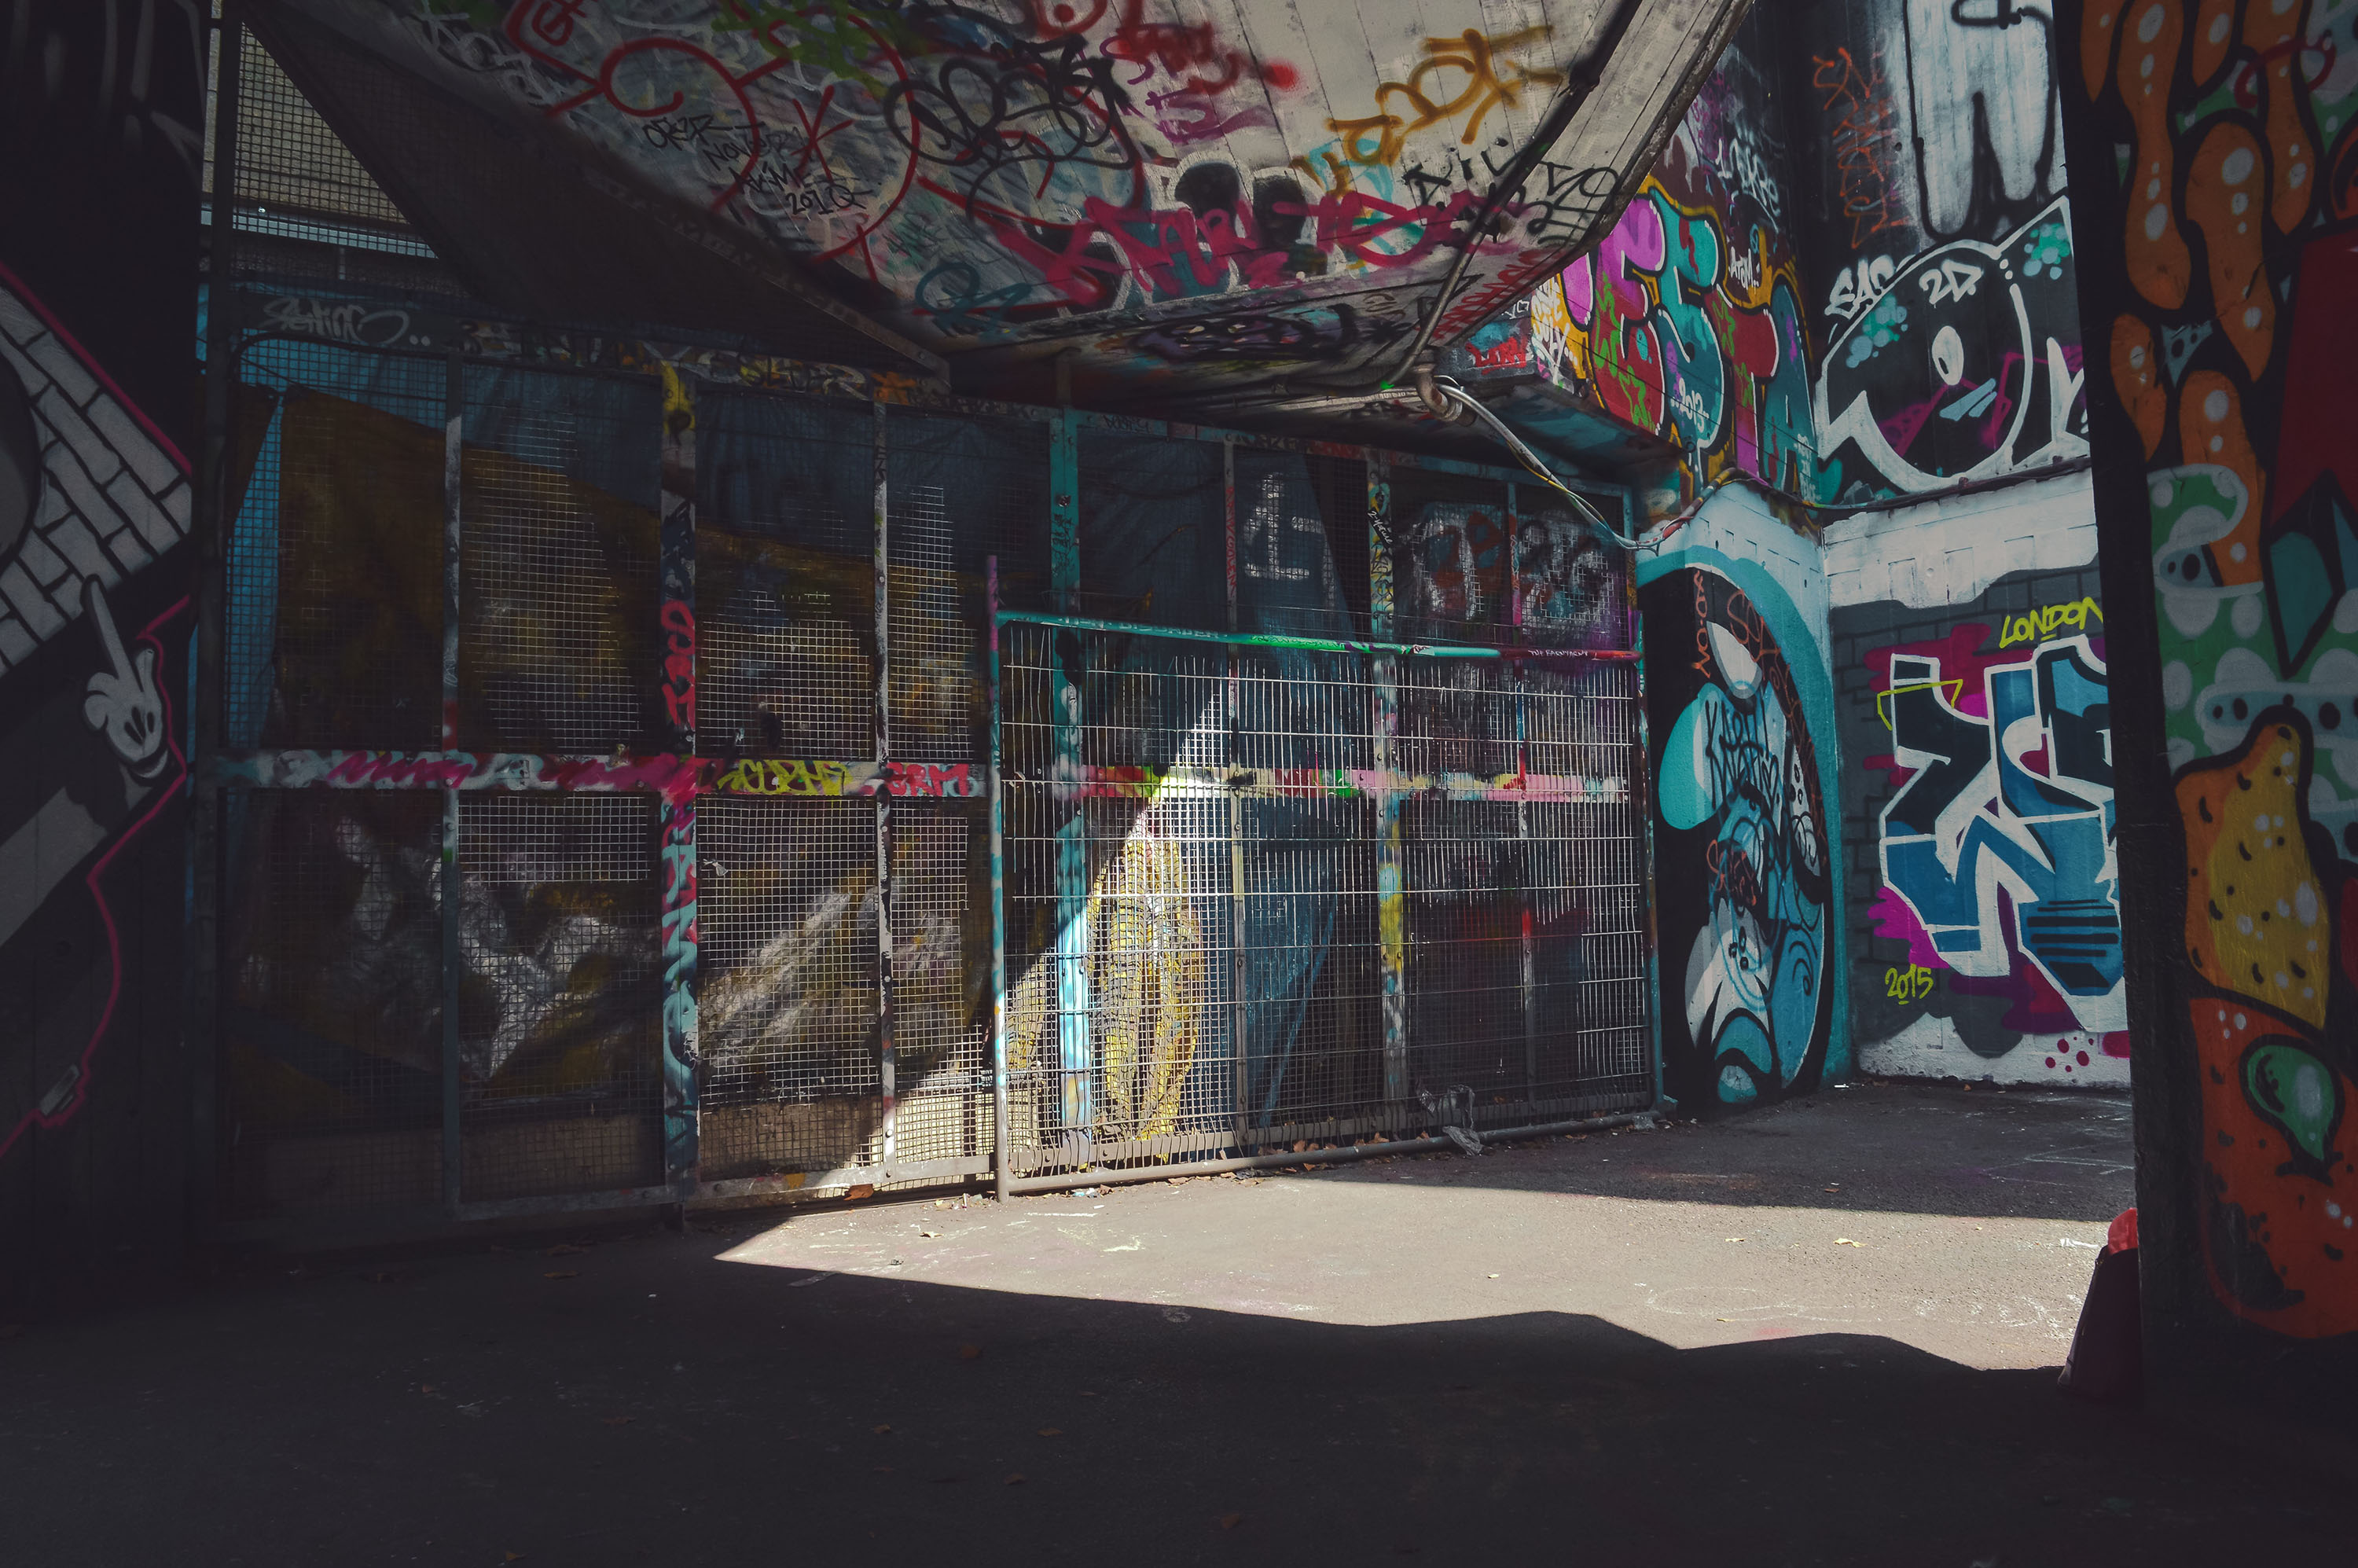 A wall is covered in graffiti in tones of black, blue and pink